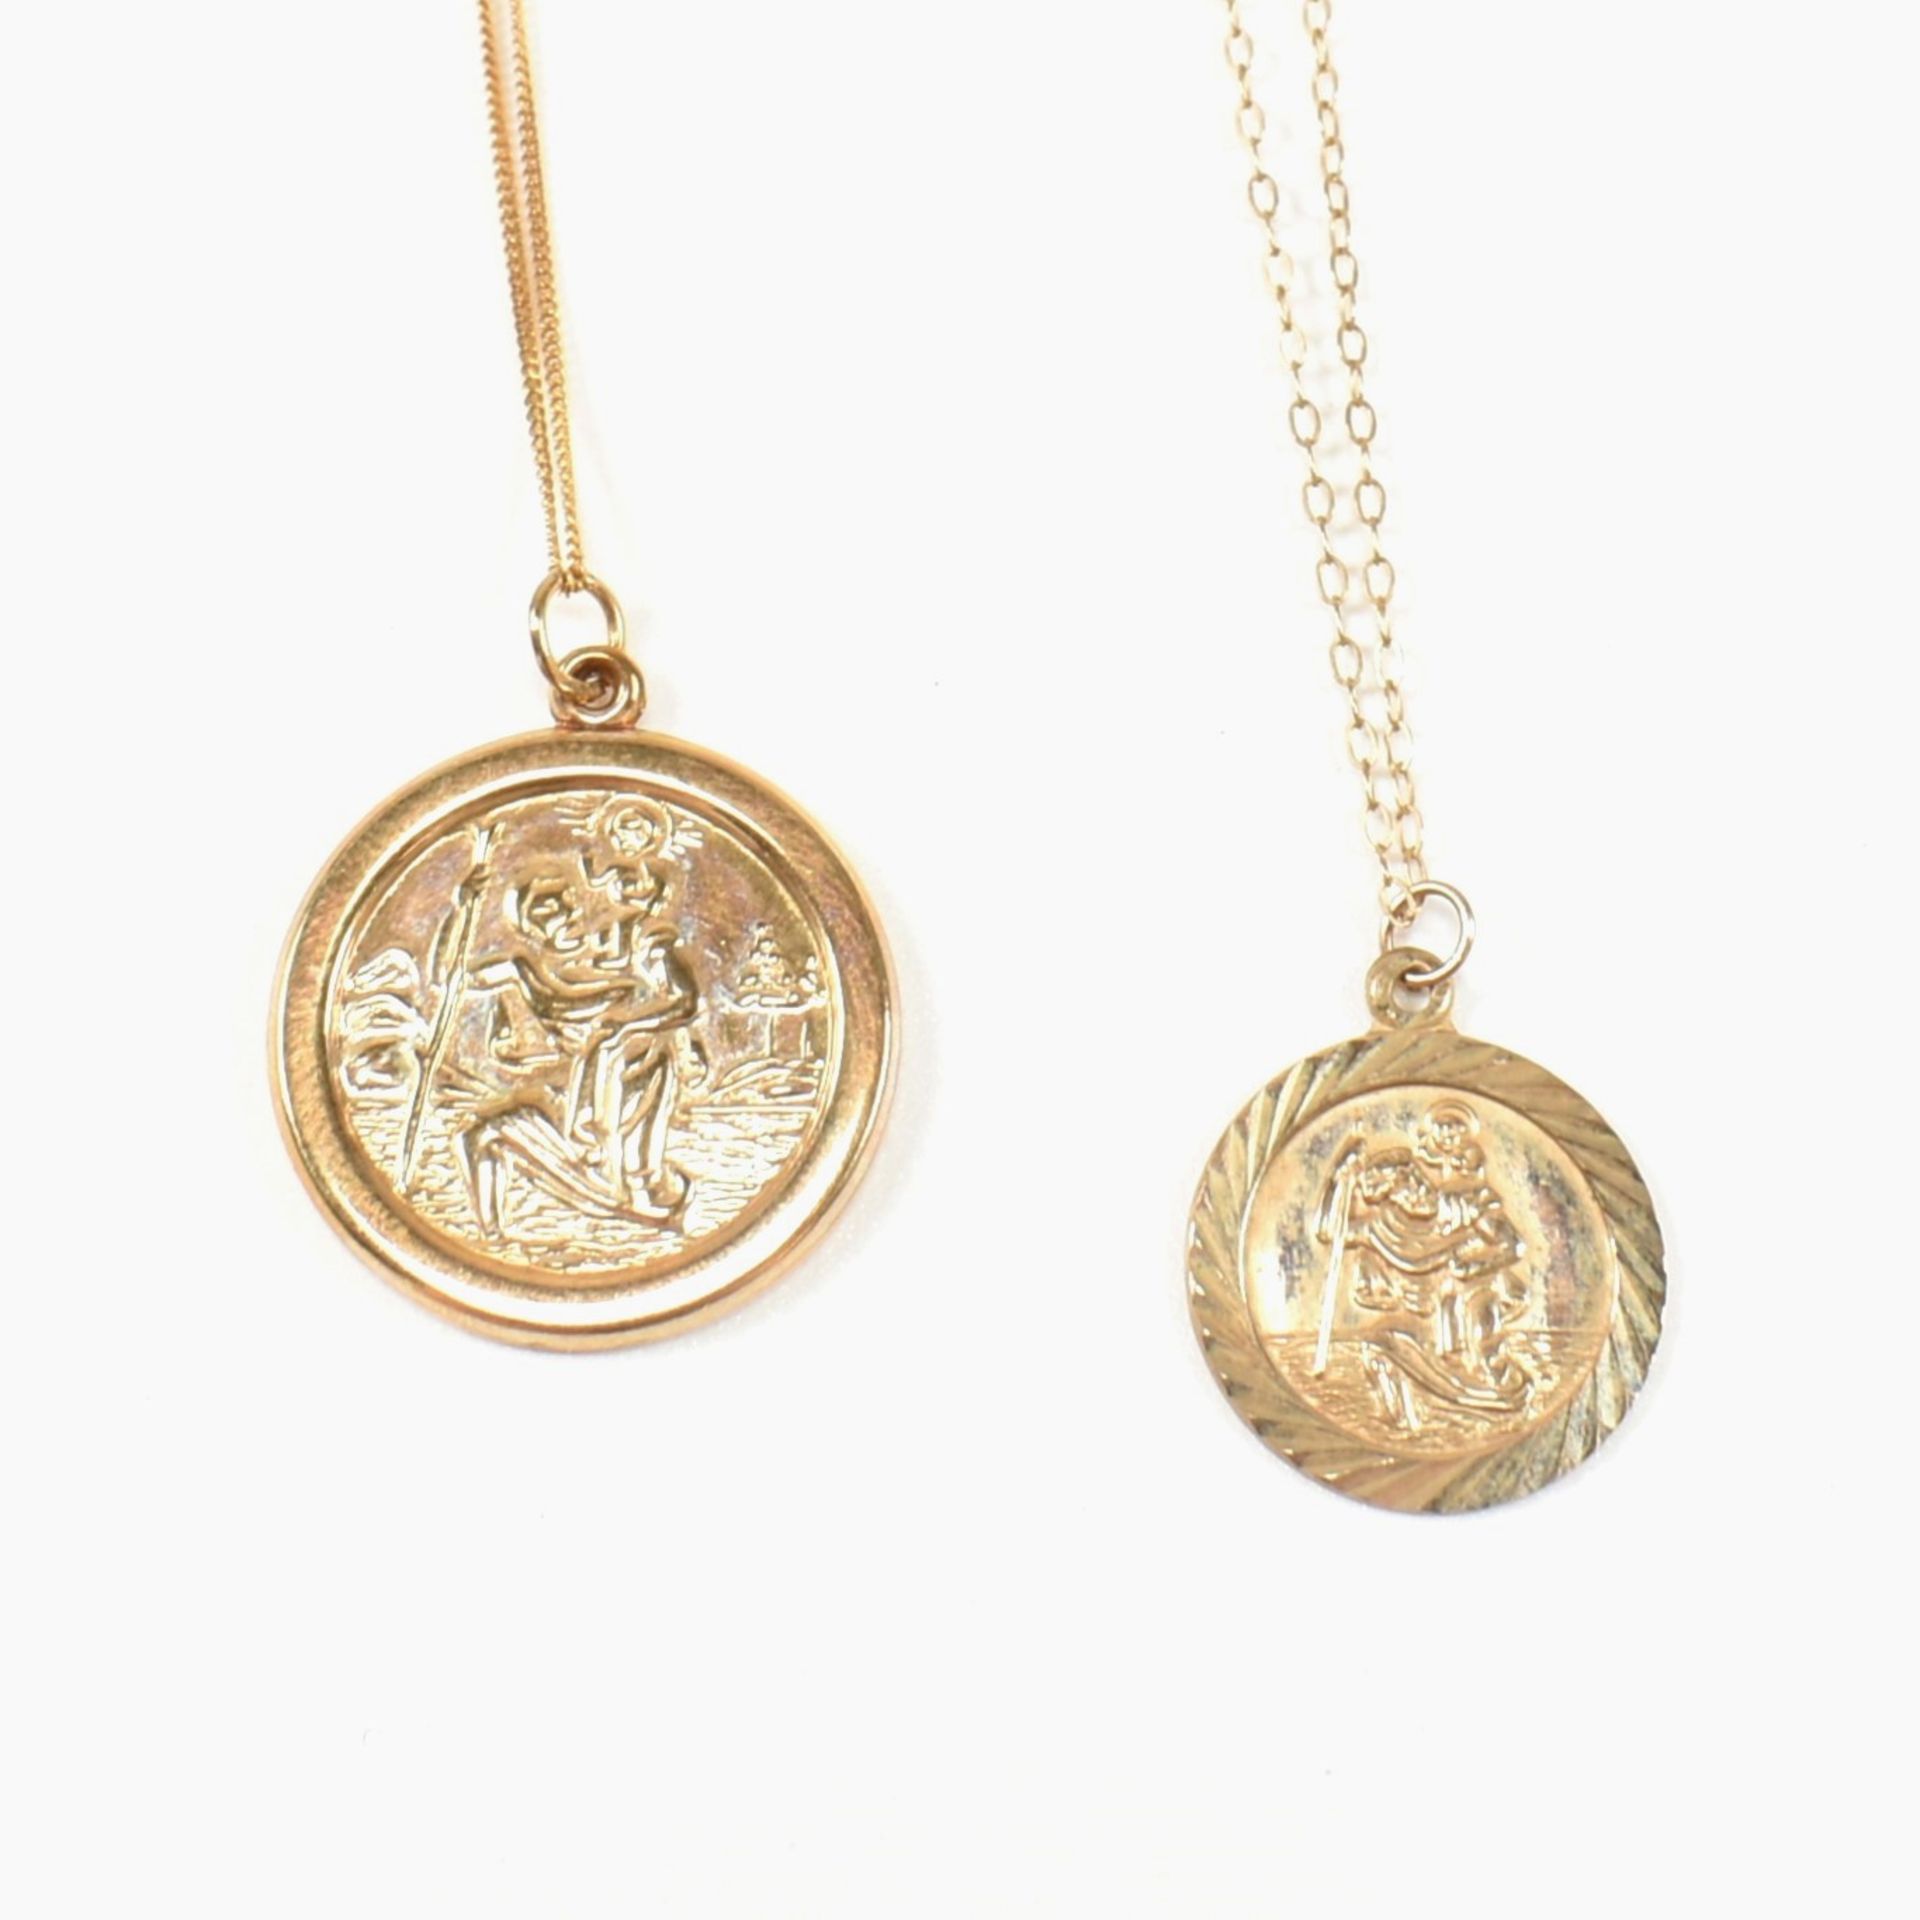 TWO 9CT GOLD ST CHRISTOPHER PENDANT NECKLACES - Image 4 of 7